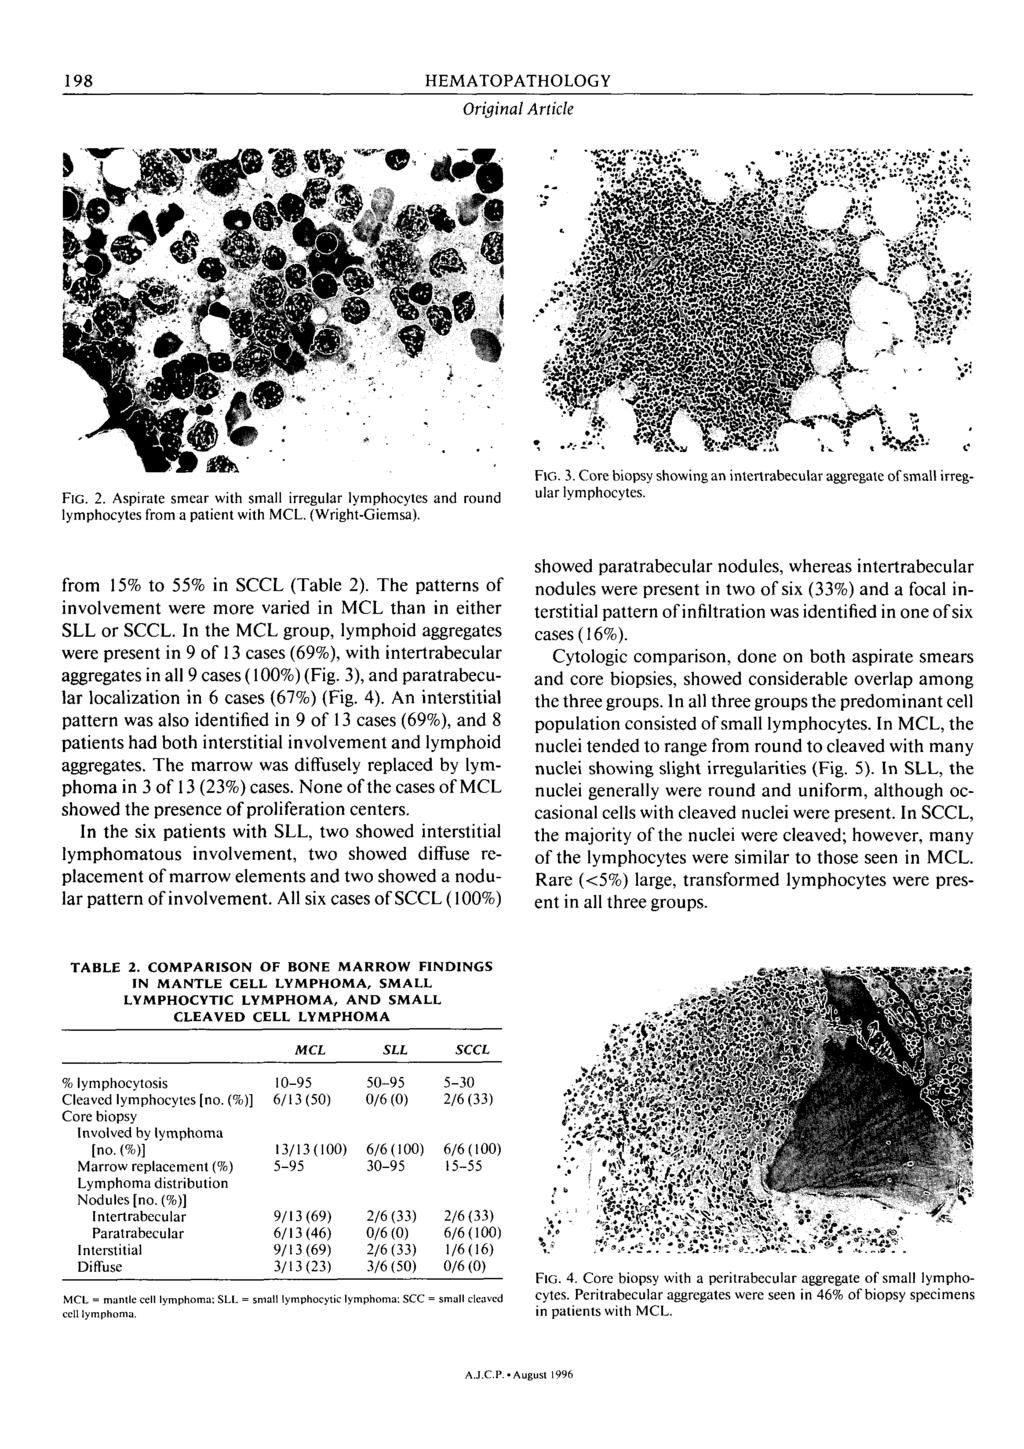 HEMATOPATHOLOGY 198 Origh Article from 15% to 55% in SCCL (Table 2). The patterns of involvement were more varied in MCL than in either SLL or SCCL.